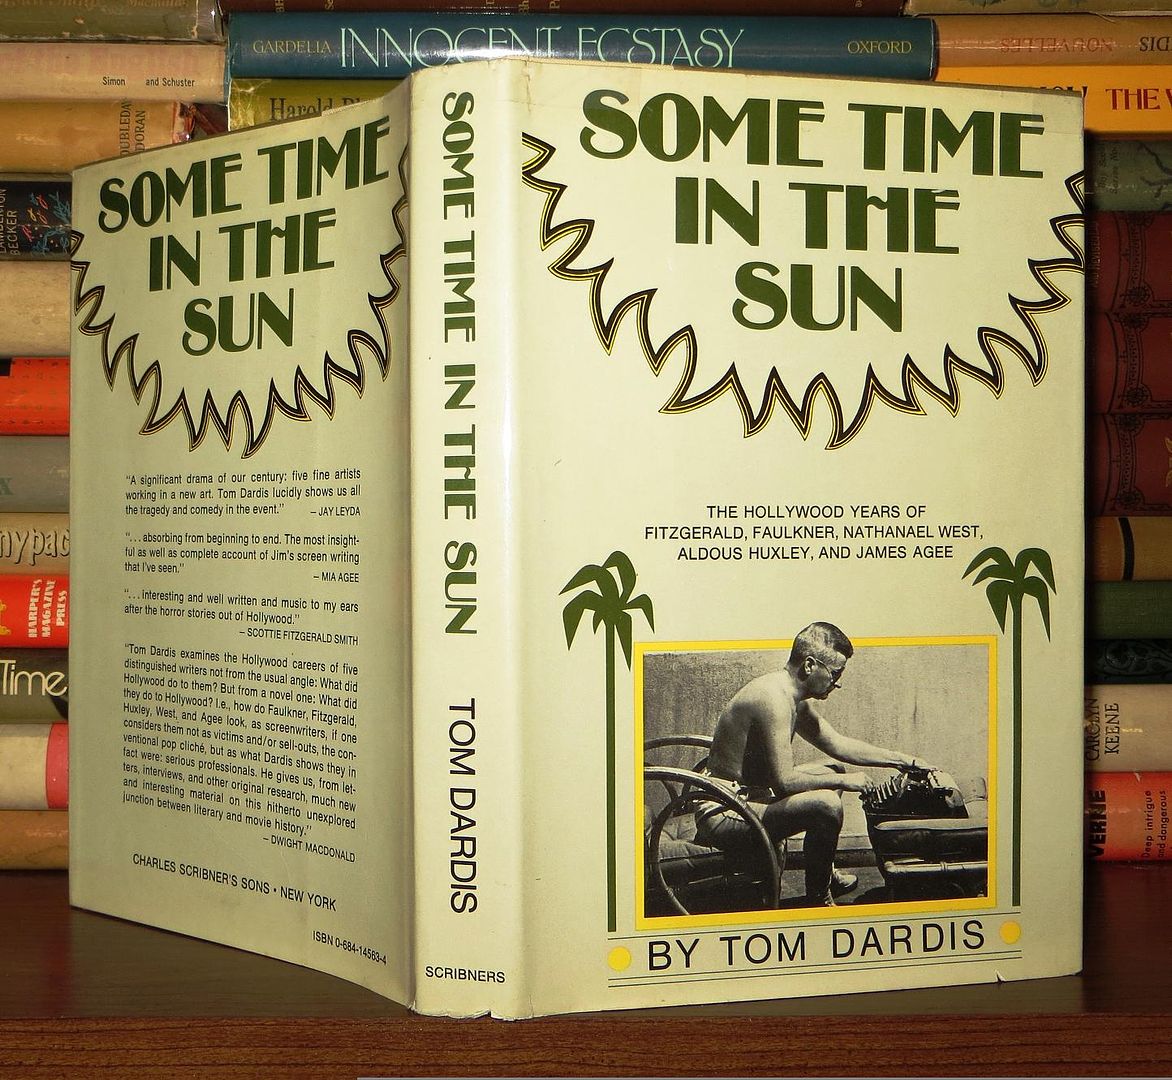 DARDIS, TOM - Some Time in the Sun the Hollywood Years of Fitzgerald, Faulkner, West, Huxley, & James Agee